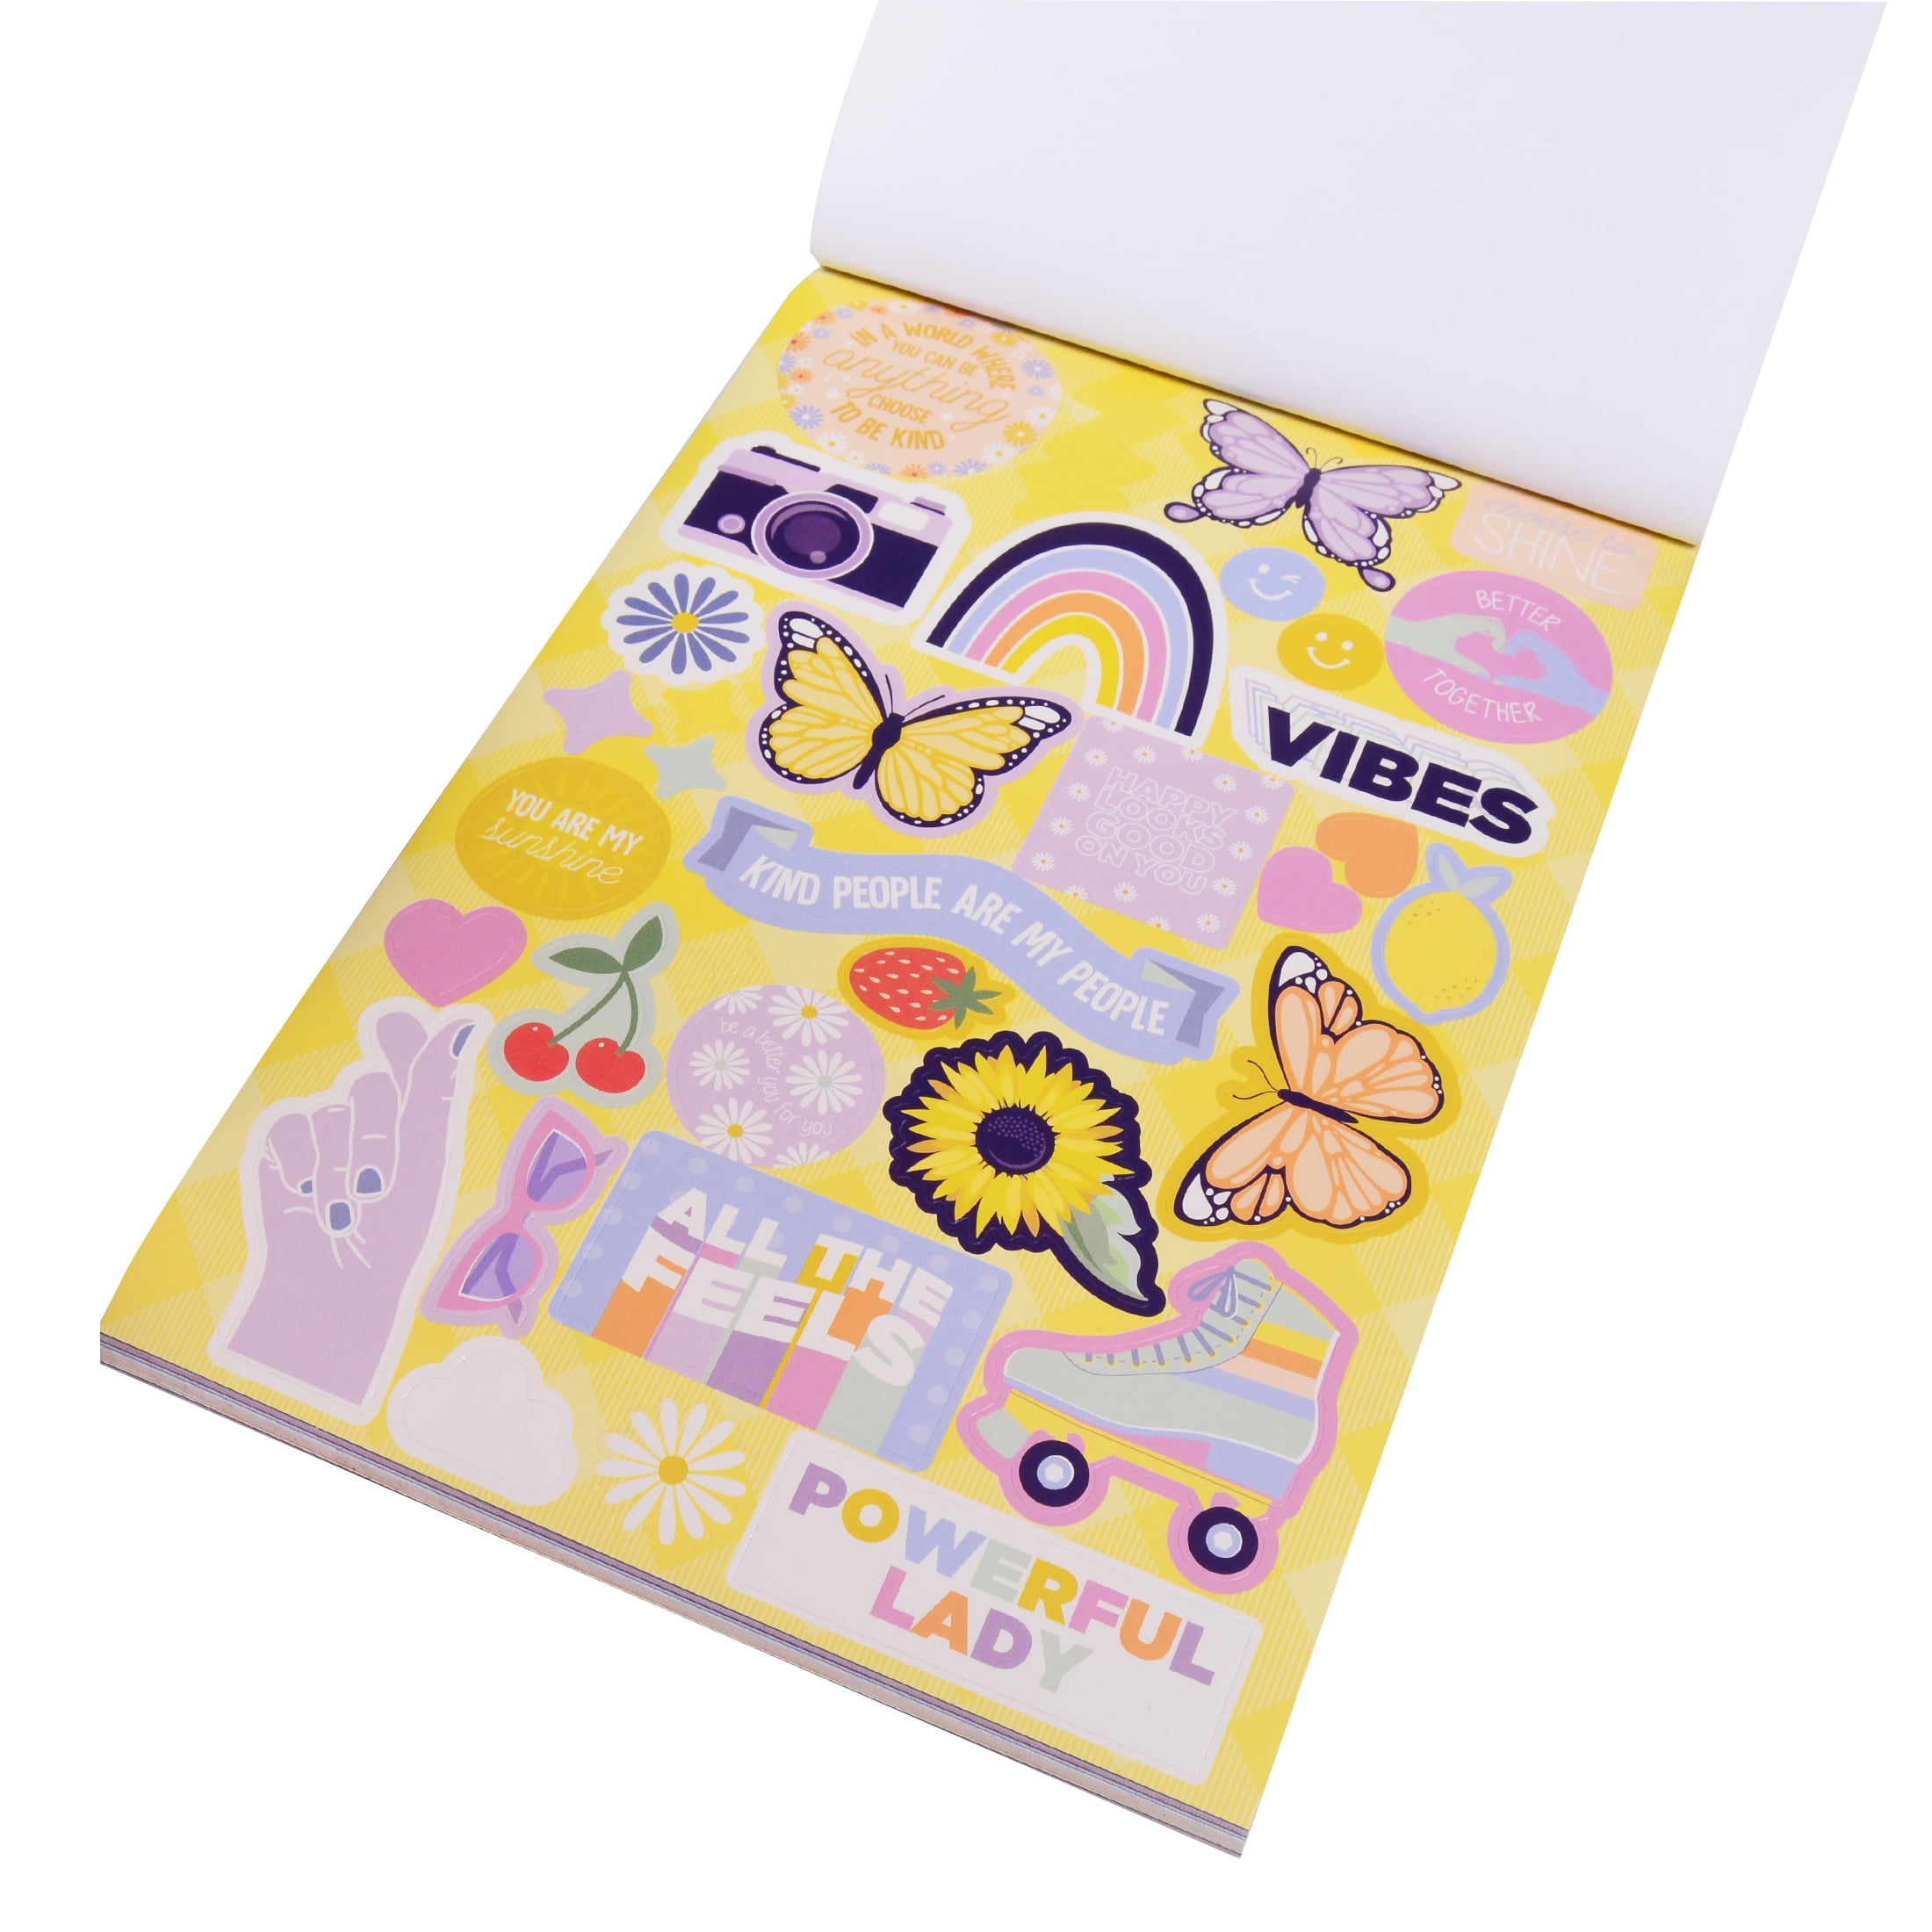 Pen+Gear Awesome Sticker Book, 40 Pages, 2500+ Paper and Foil Stickers